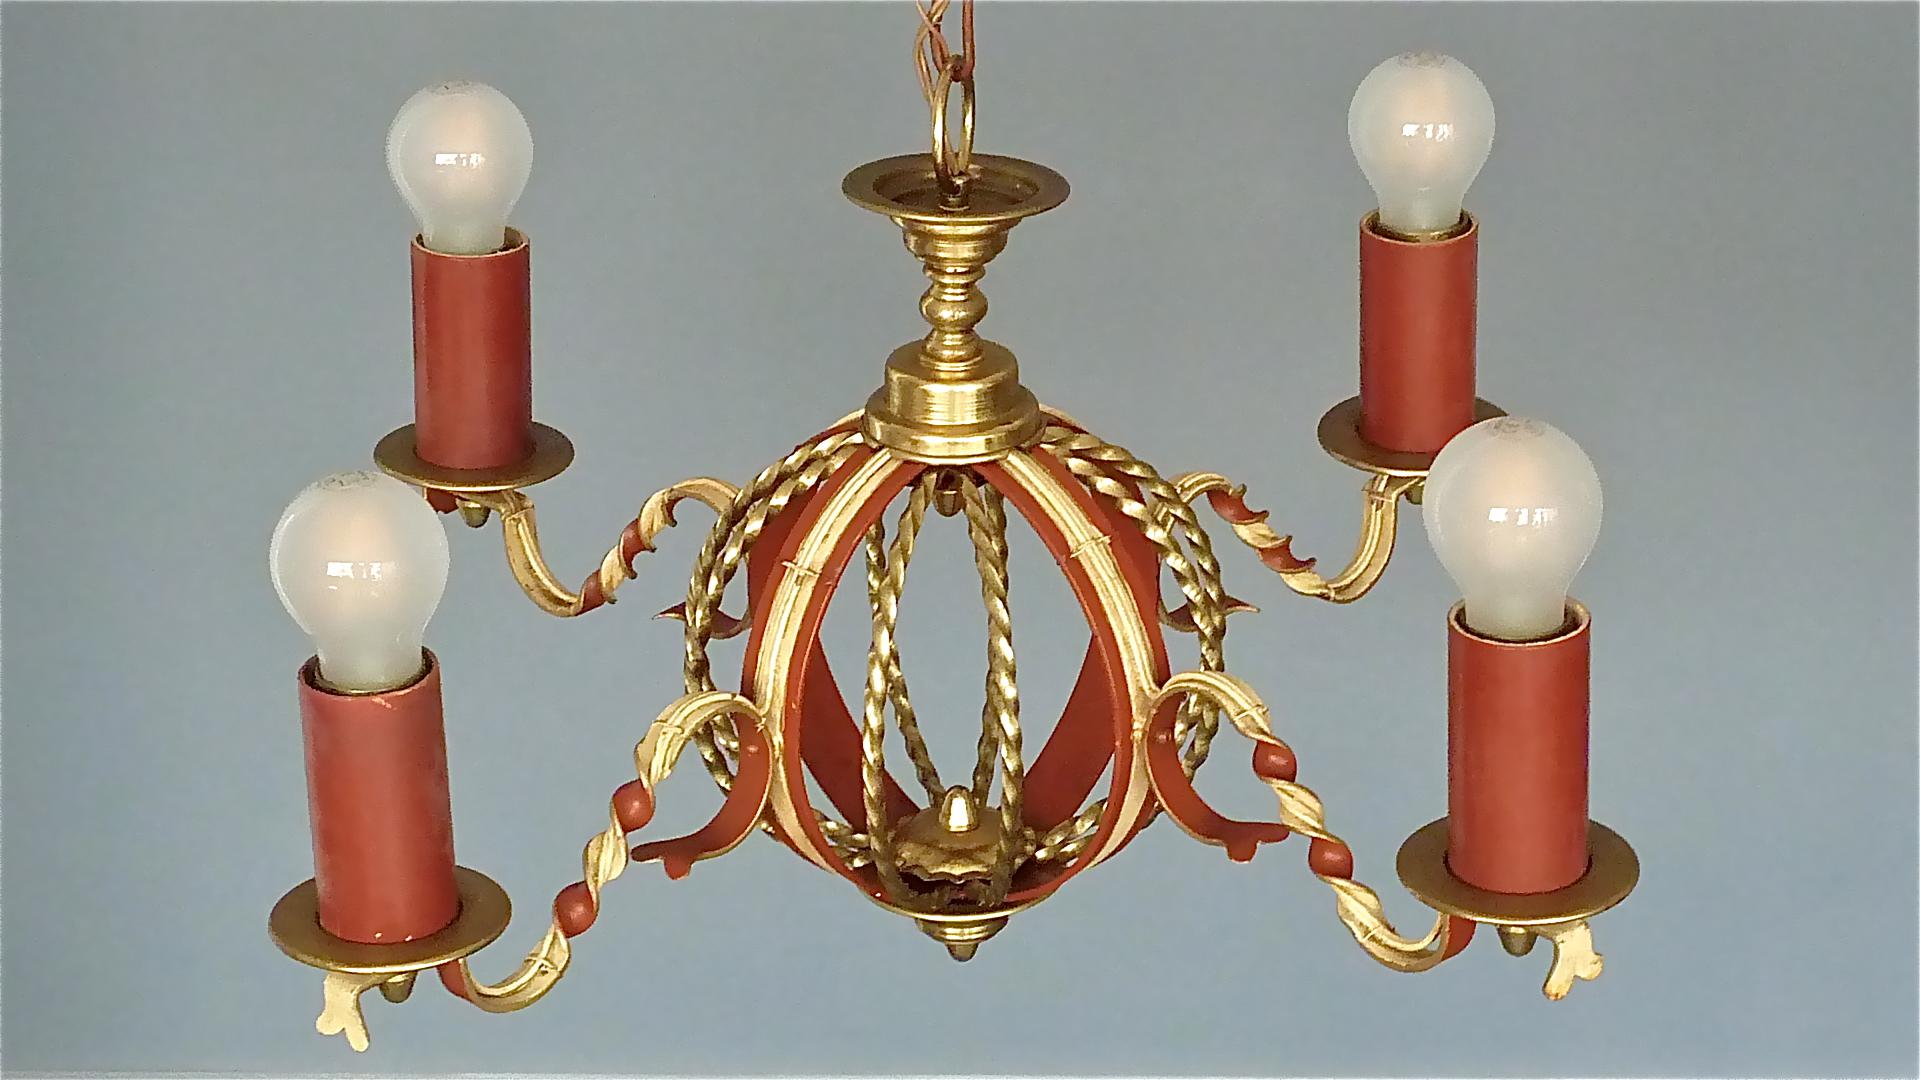 Fantastic large french midcentury globe chandelier in Gilbert Poillerat Style, France around 1940s to 1950s. The chain-hanging and height adjustable pendant is made of red and off-white to creamy beige enameled wrought and twisted iron in